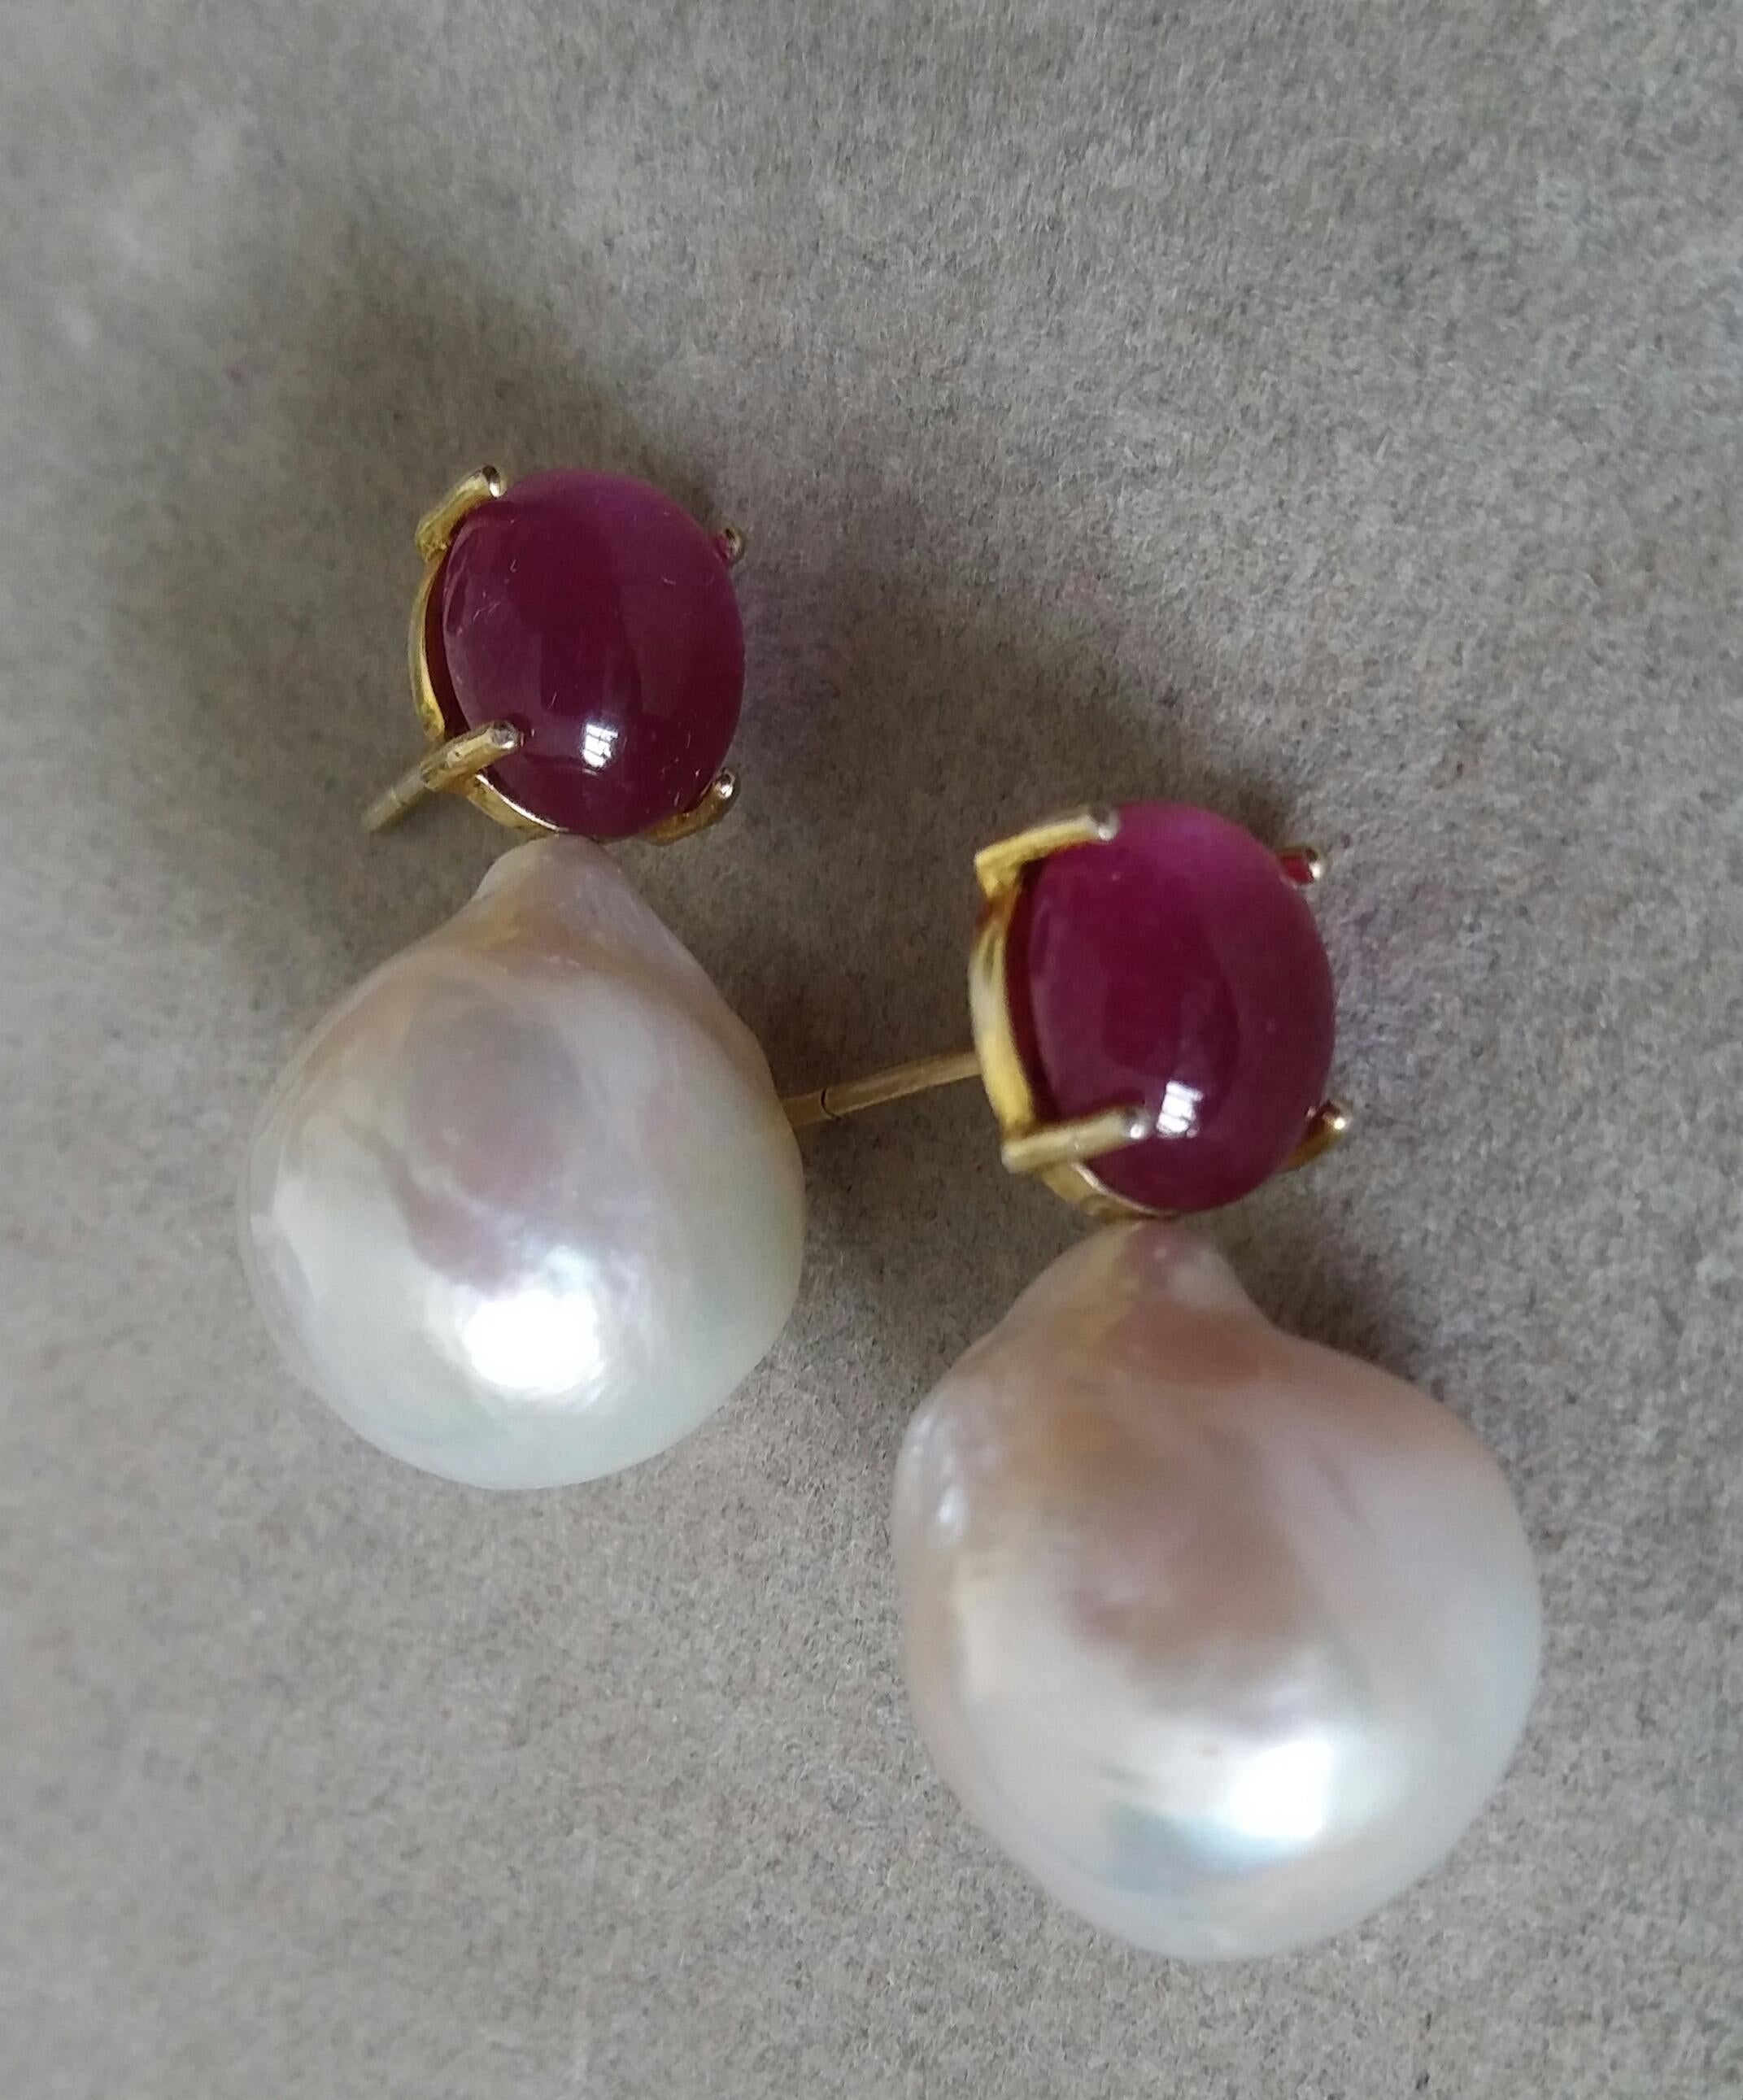 Big Size White Baroque Pearls Oval Ruby Cabochon 14 Carat Yellow Gold Earrings For Sale 1